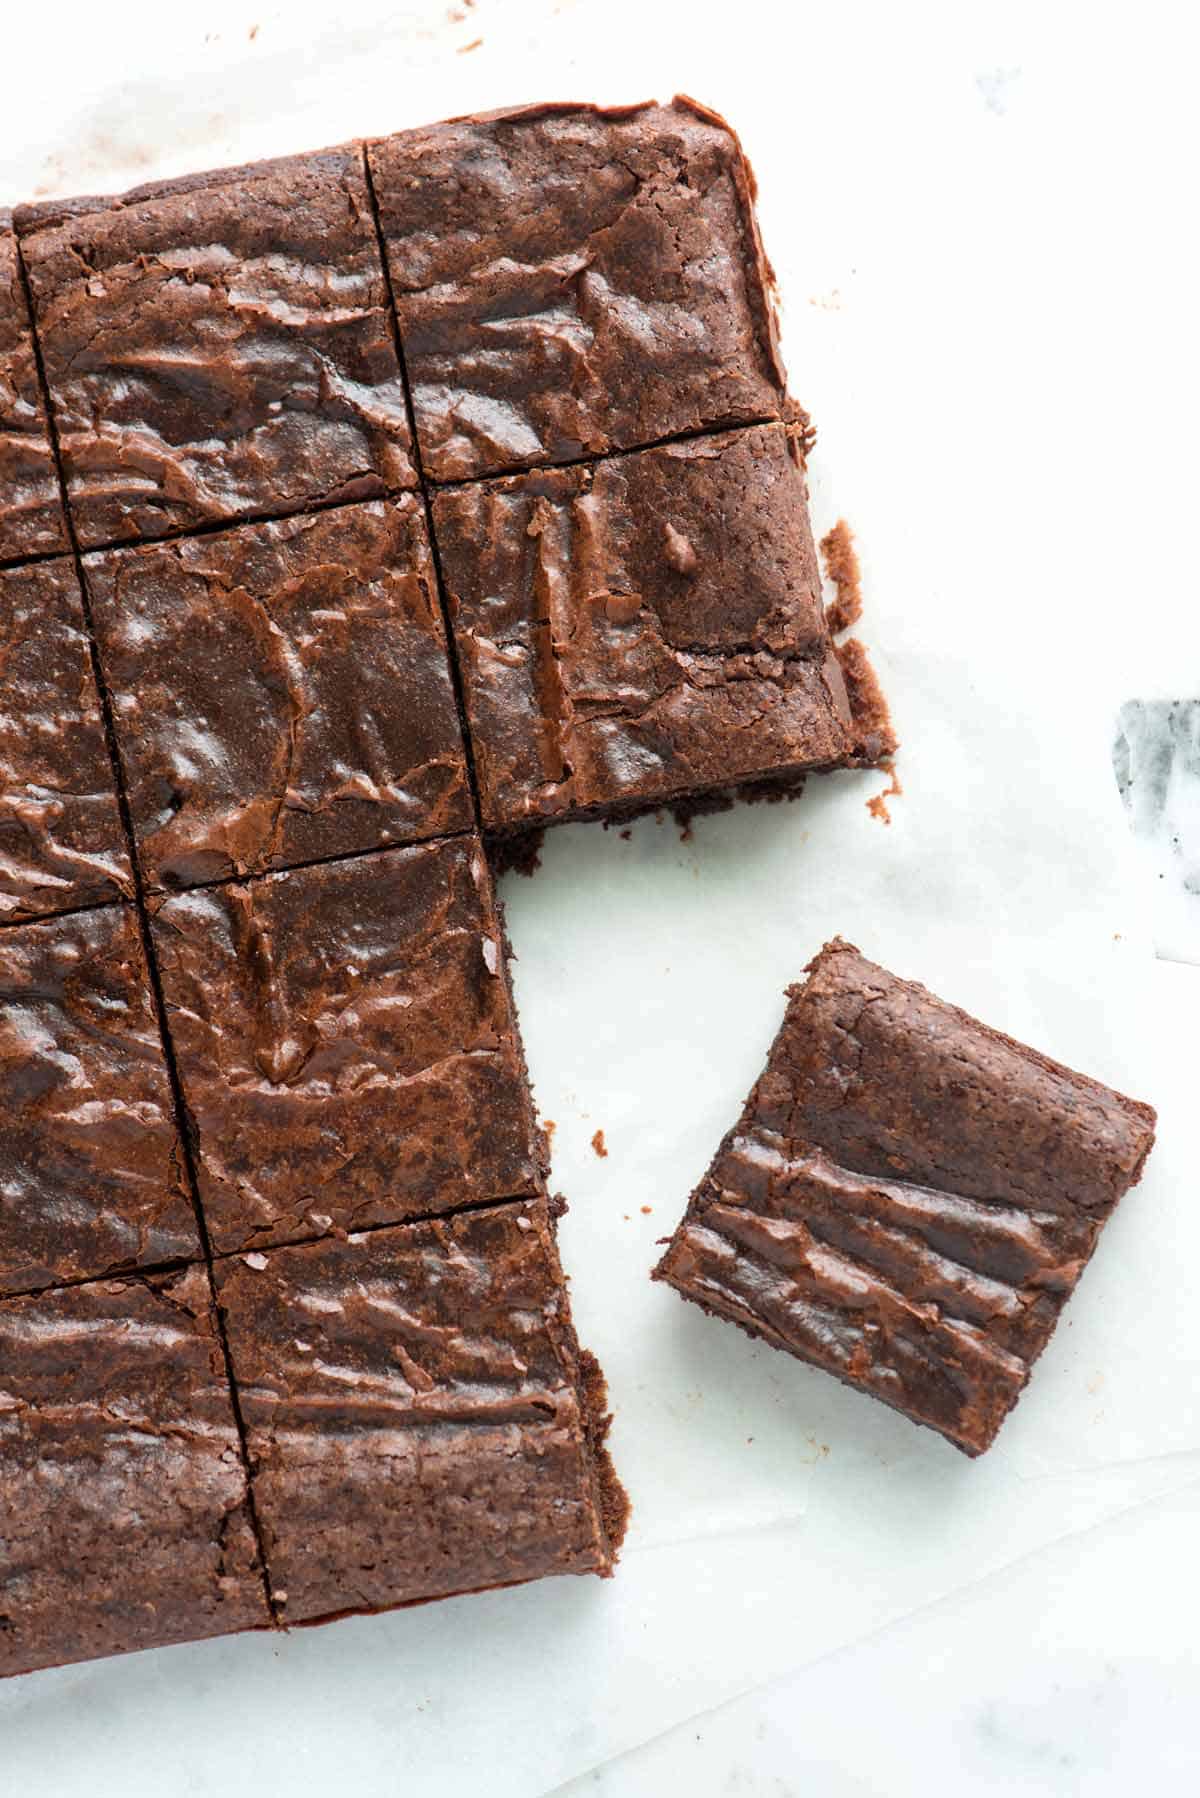 Best fudgy brownies with crinkly tops